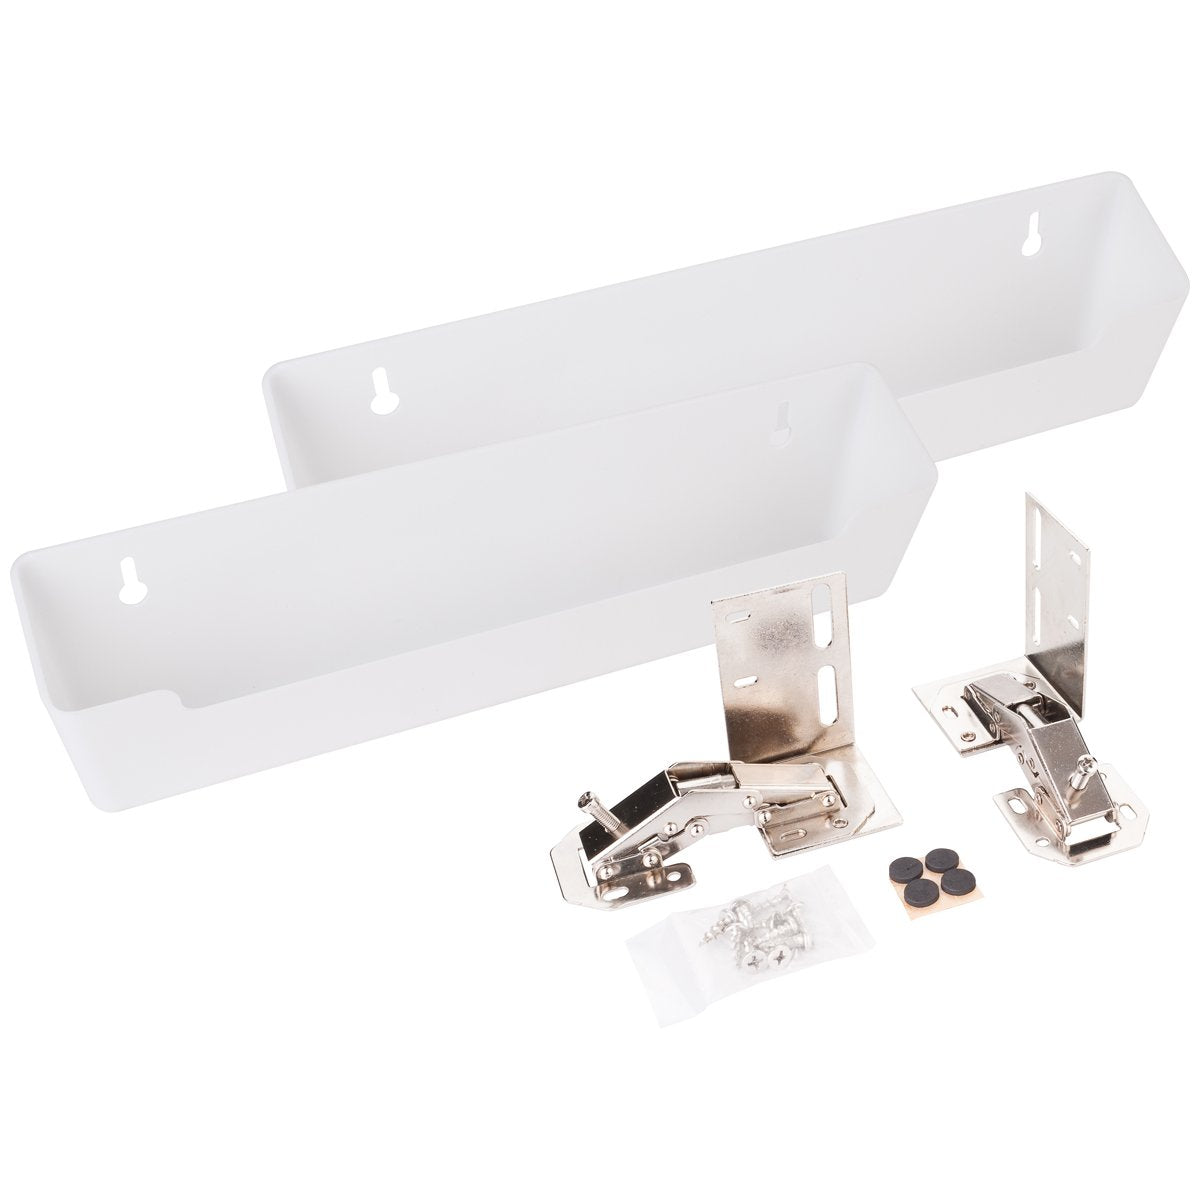 11" Slim Depth Plastic Tip-Out Tray Kit for Sink Front-DirectCabinets.com